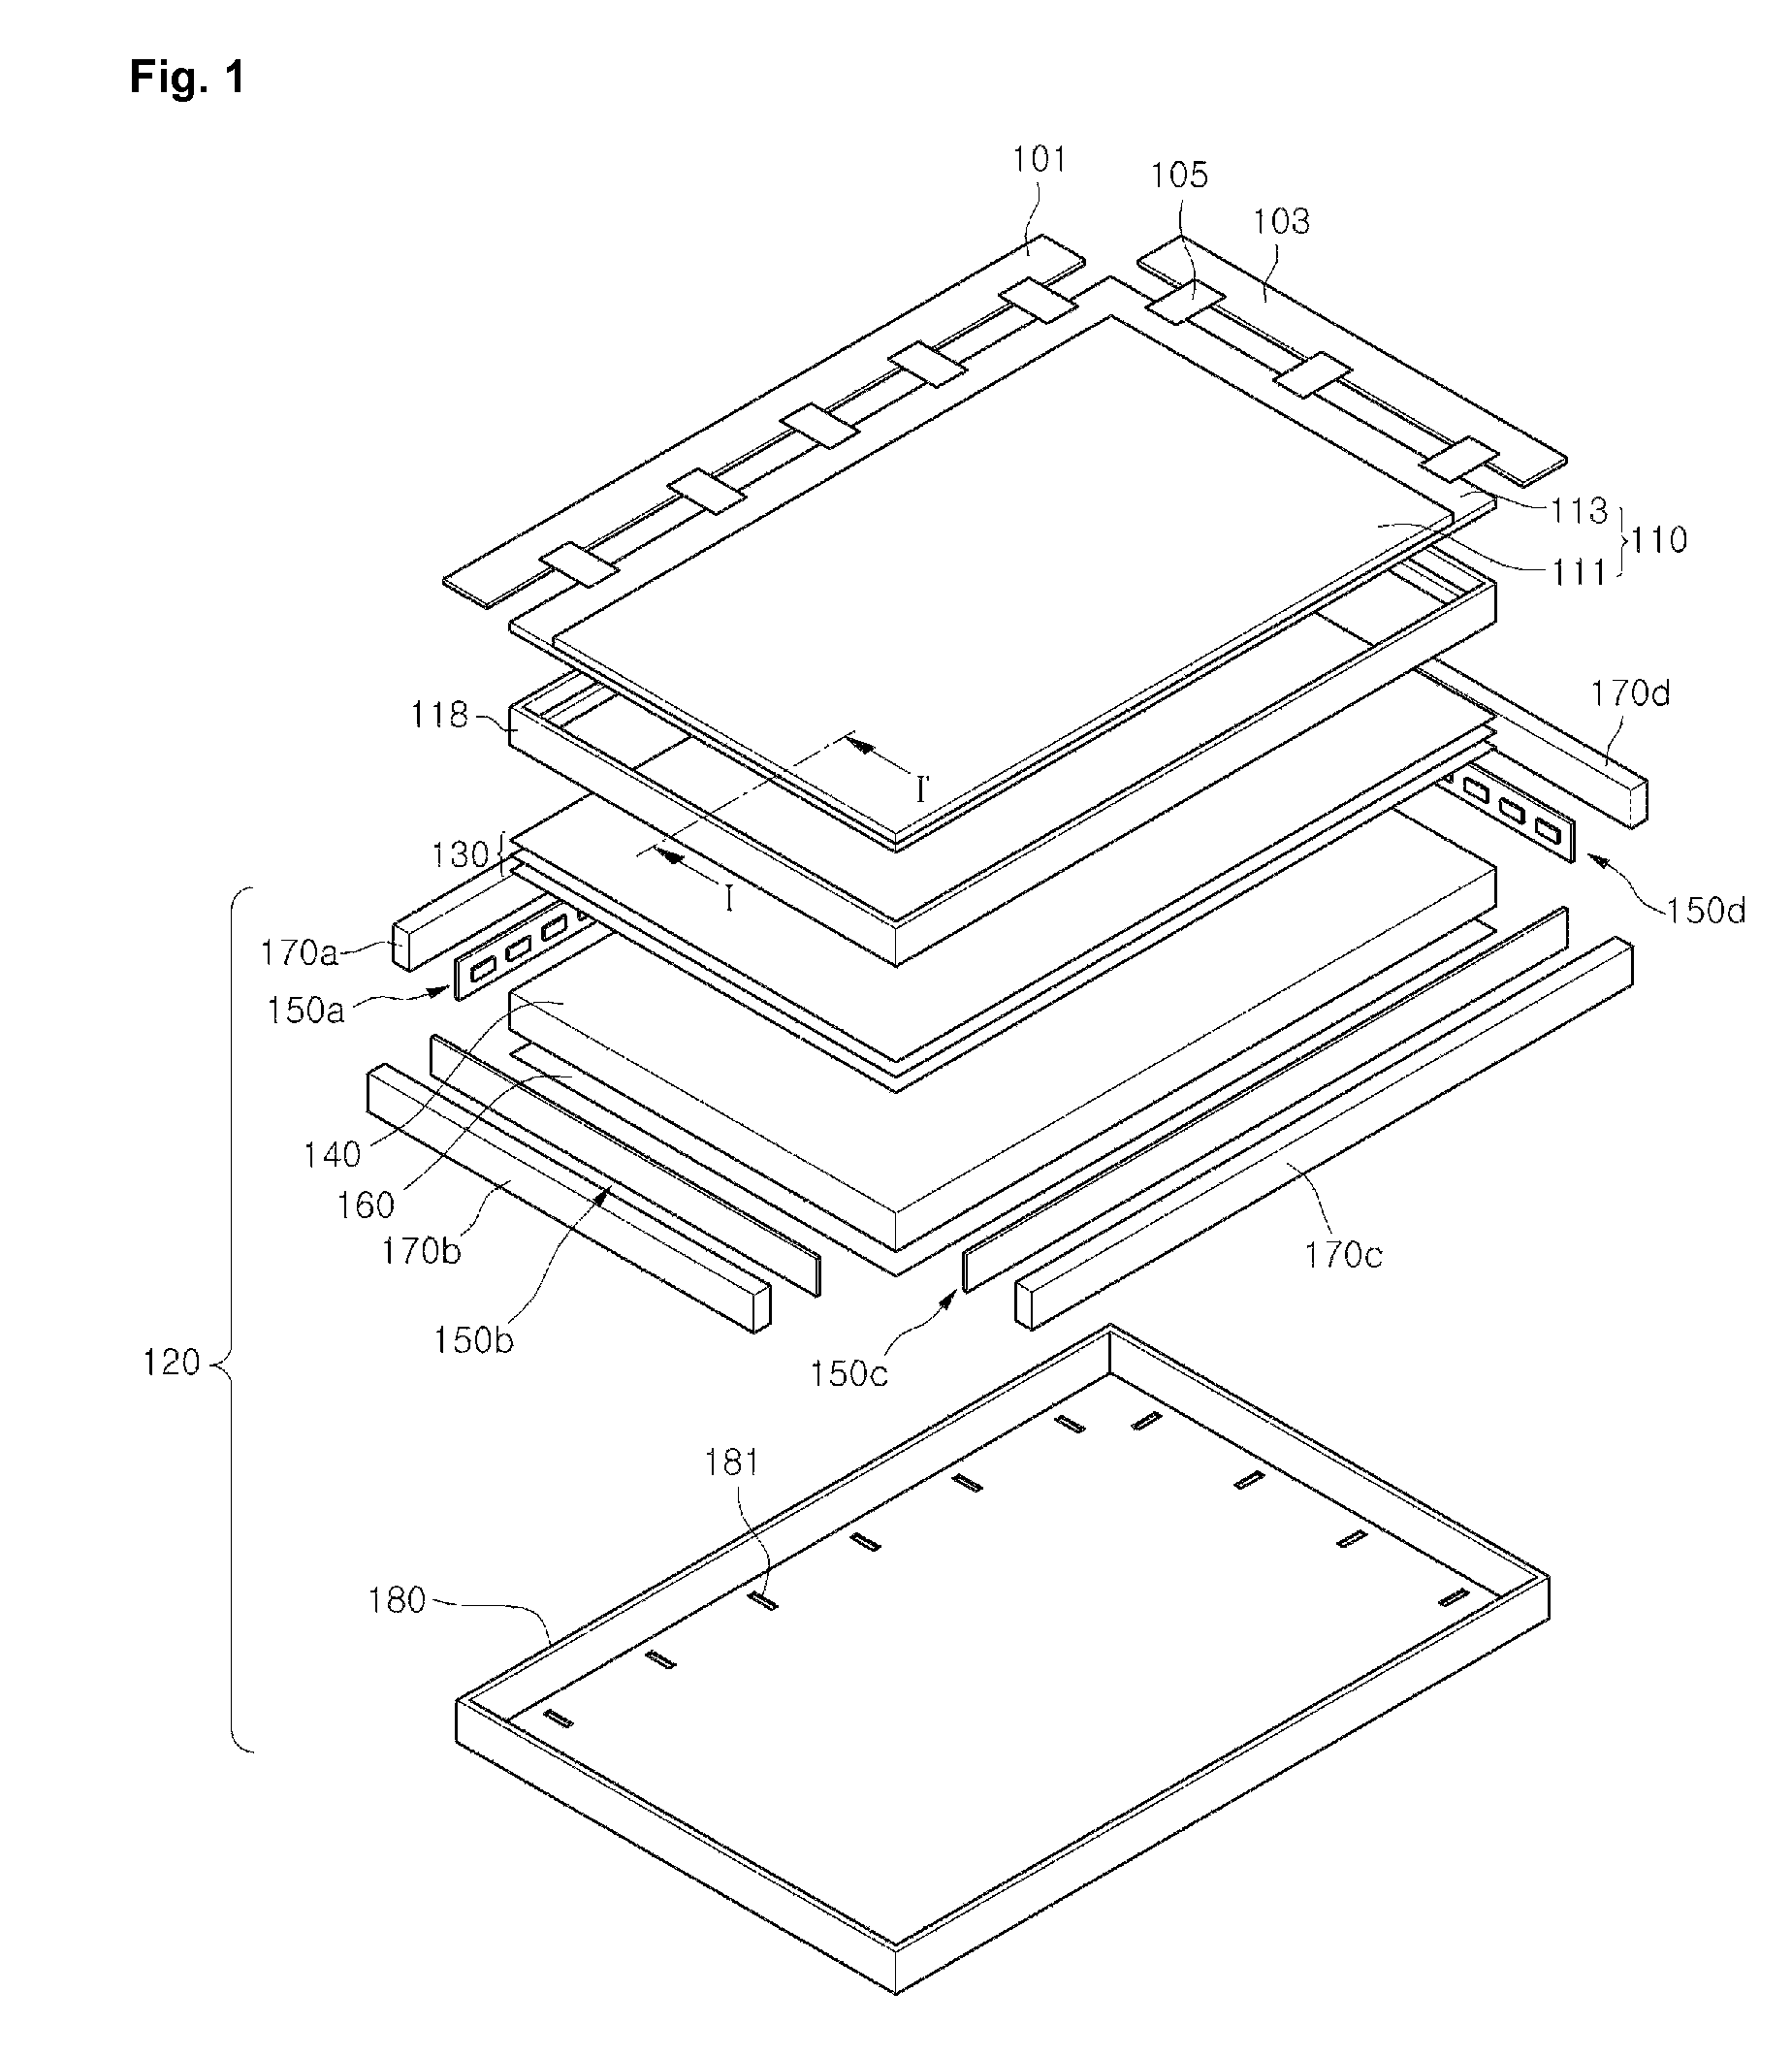 Backlight unit comprising a plurality of slits formed on a bottom surface of at least one edge of a bottom cover and liquid crystal display device having the same